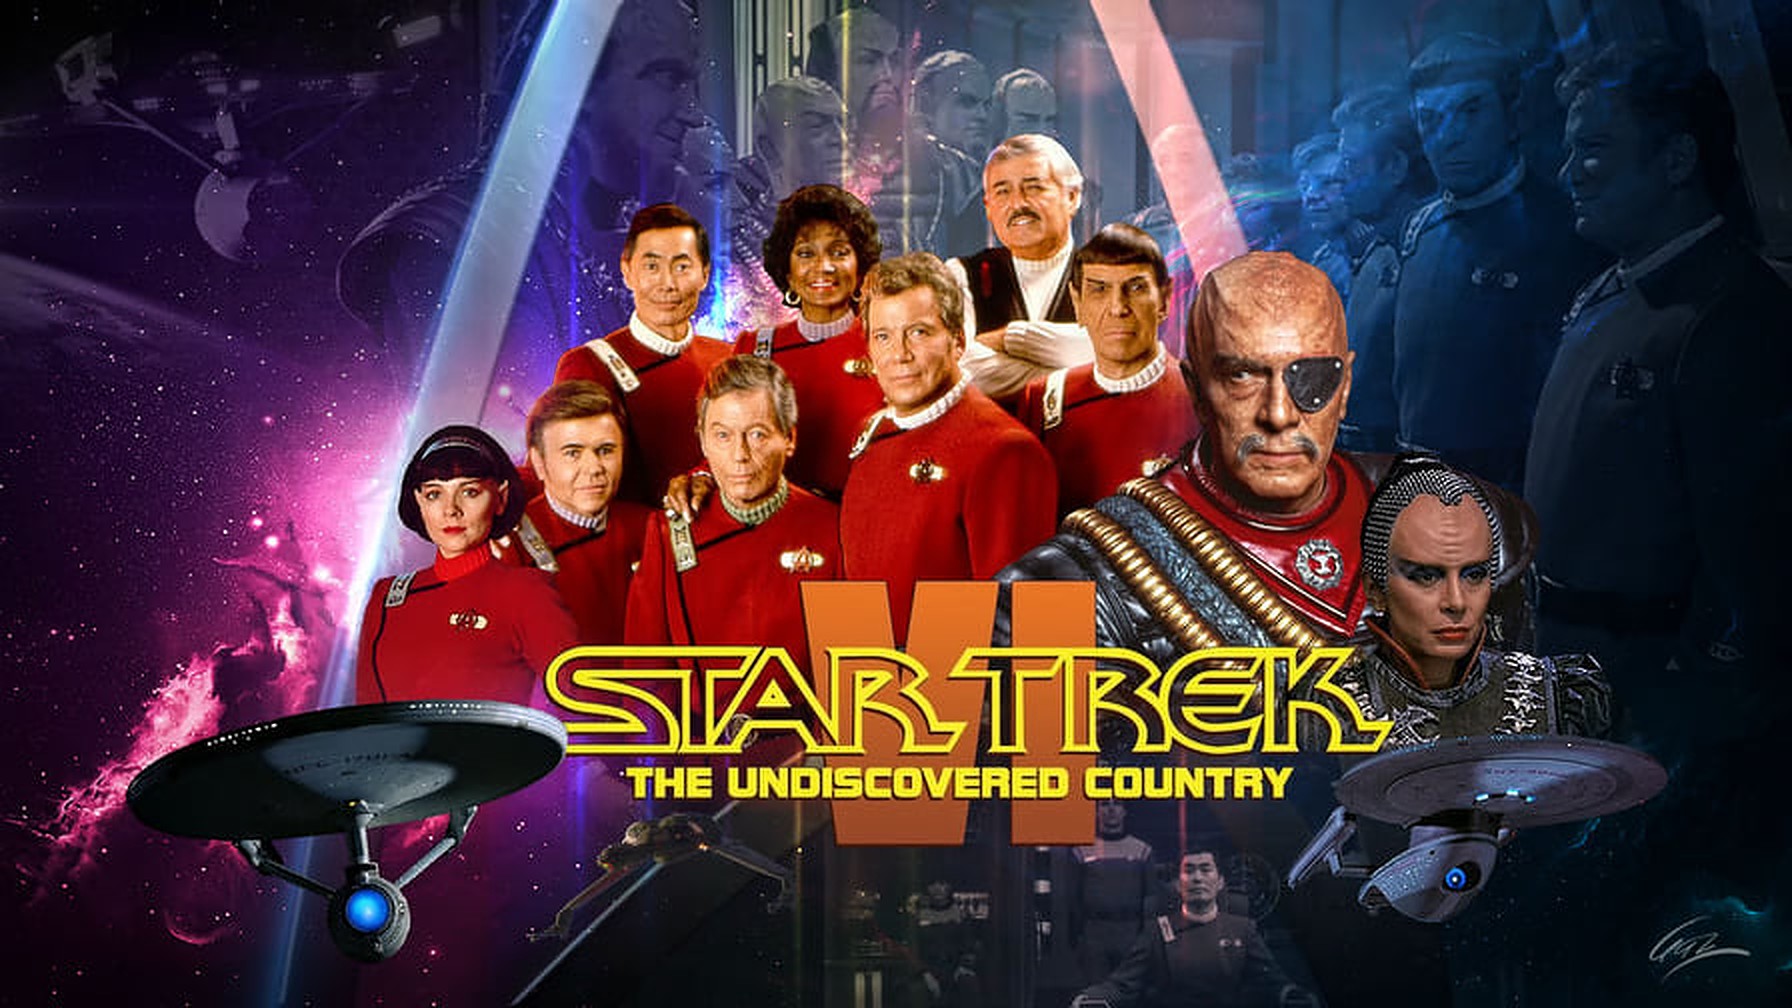 42-facts-about-the-movie-star-trek-vi-the-undiscovered-country